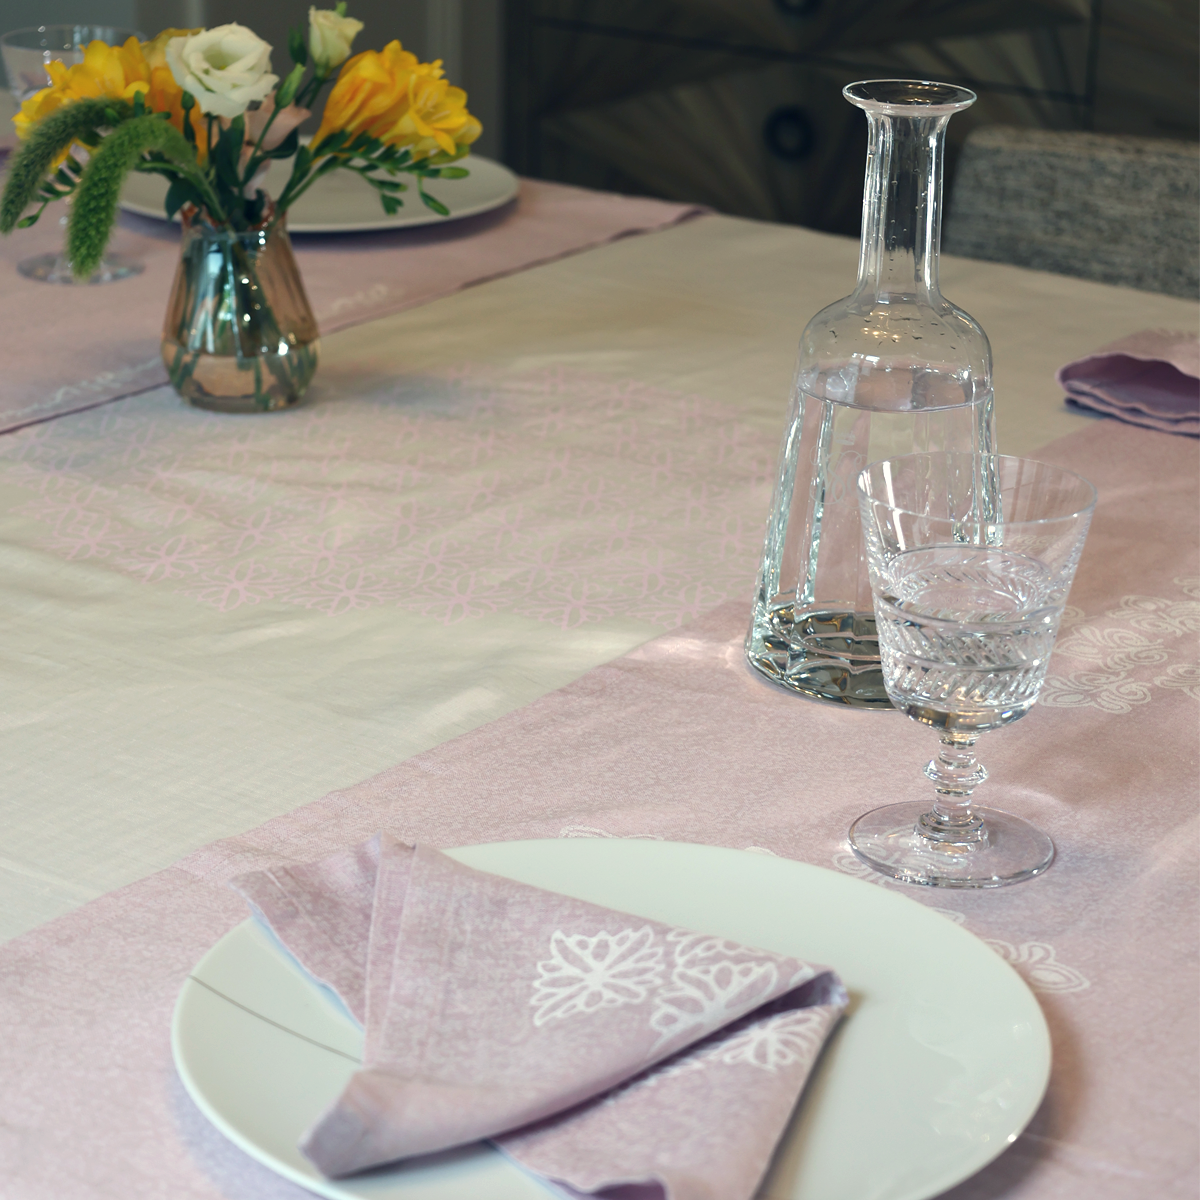 Lilac Linen Runners:  Handcrafted in Lebanon with Traditional Wood Stamp Technique